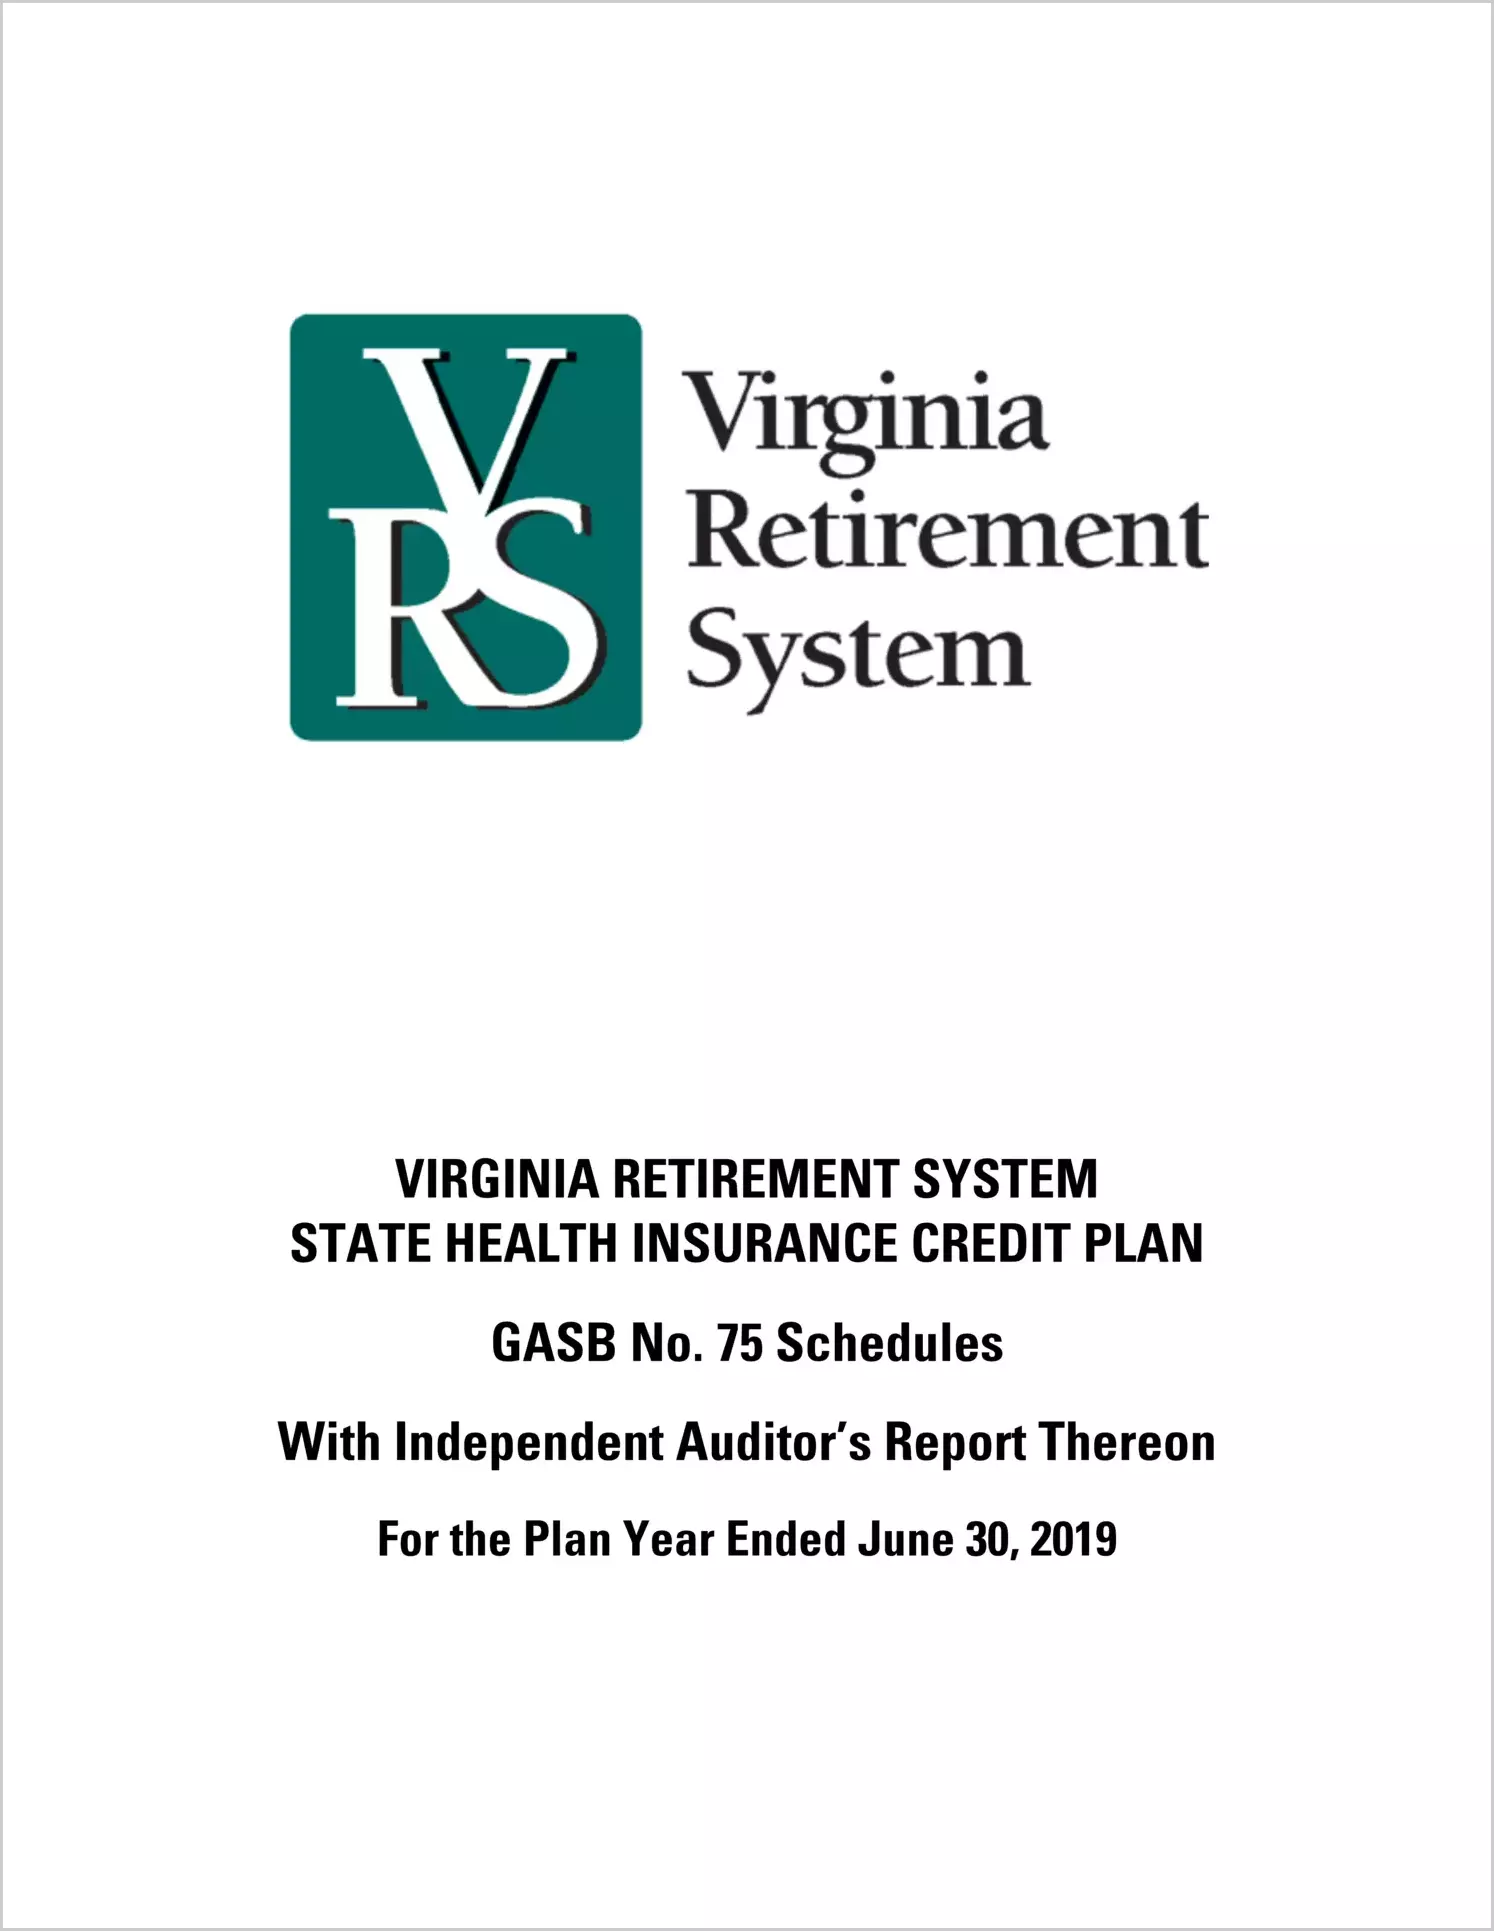 GASB 75 Schedule - Virginia Retirement System State Health Insurance Credit Plan for the year ended June 30, 2019